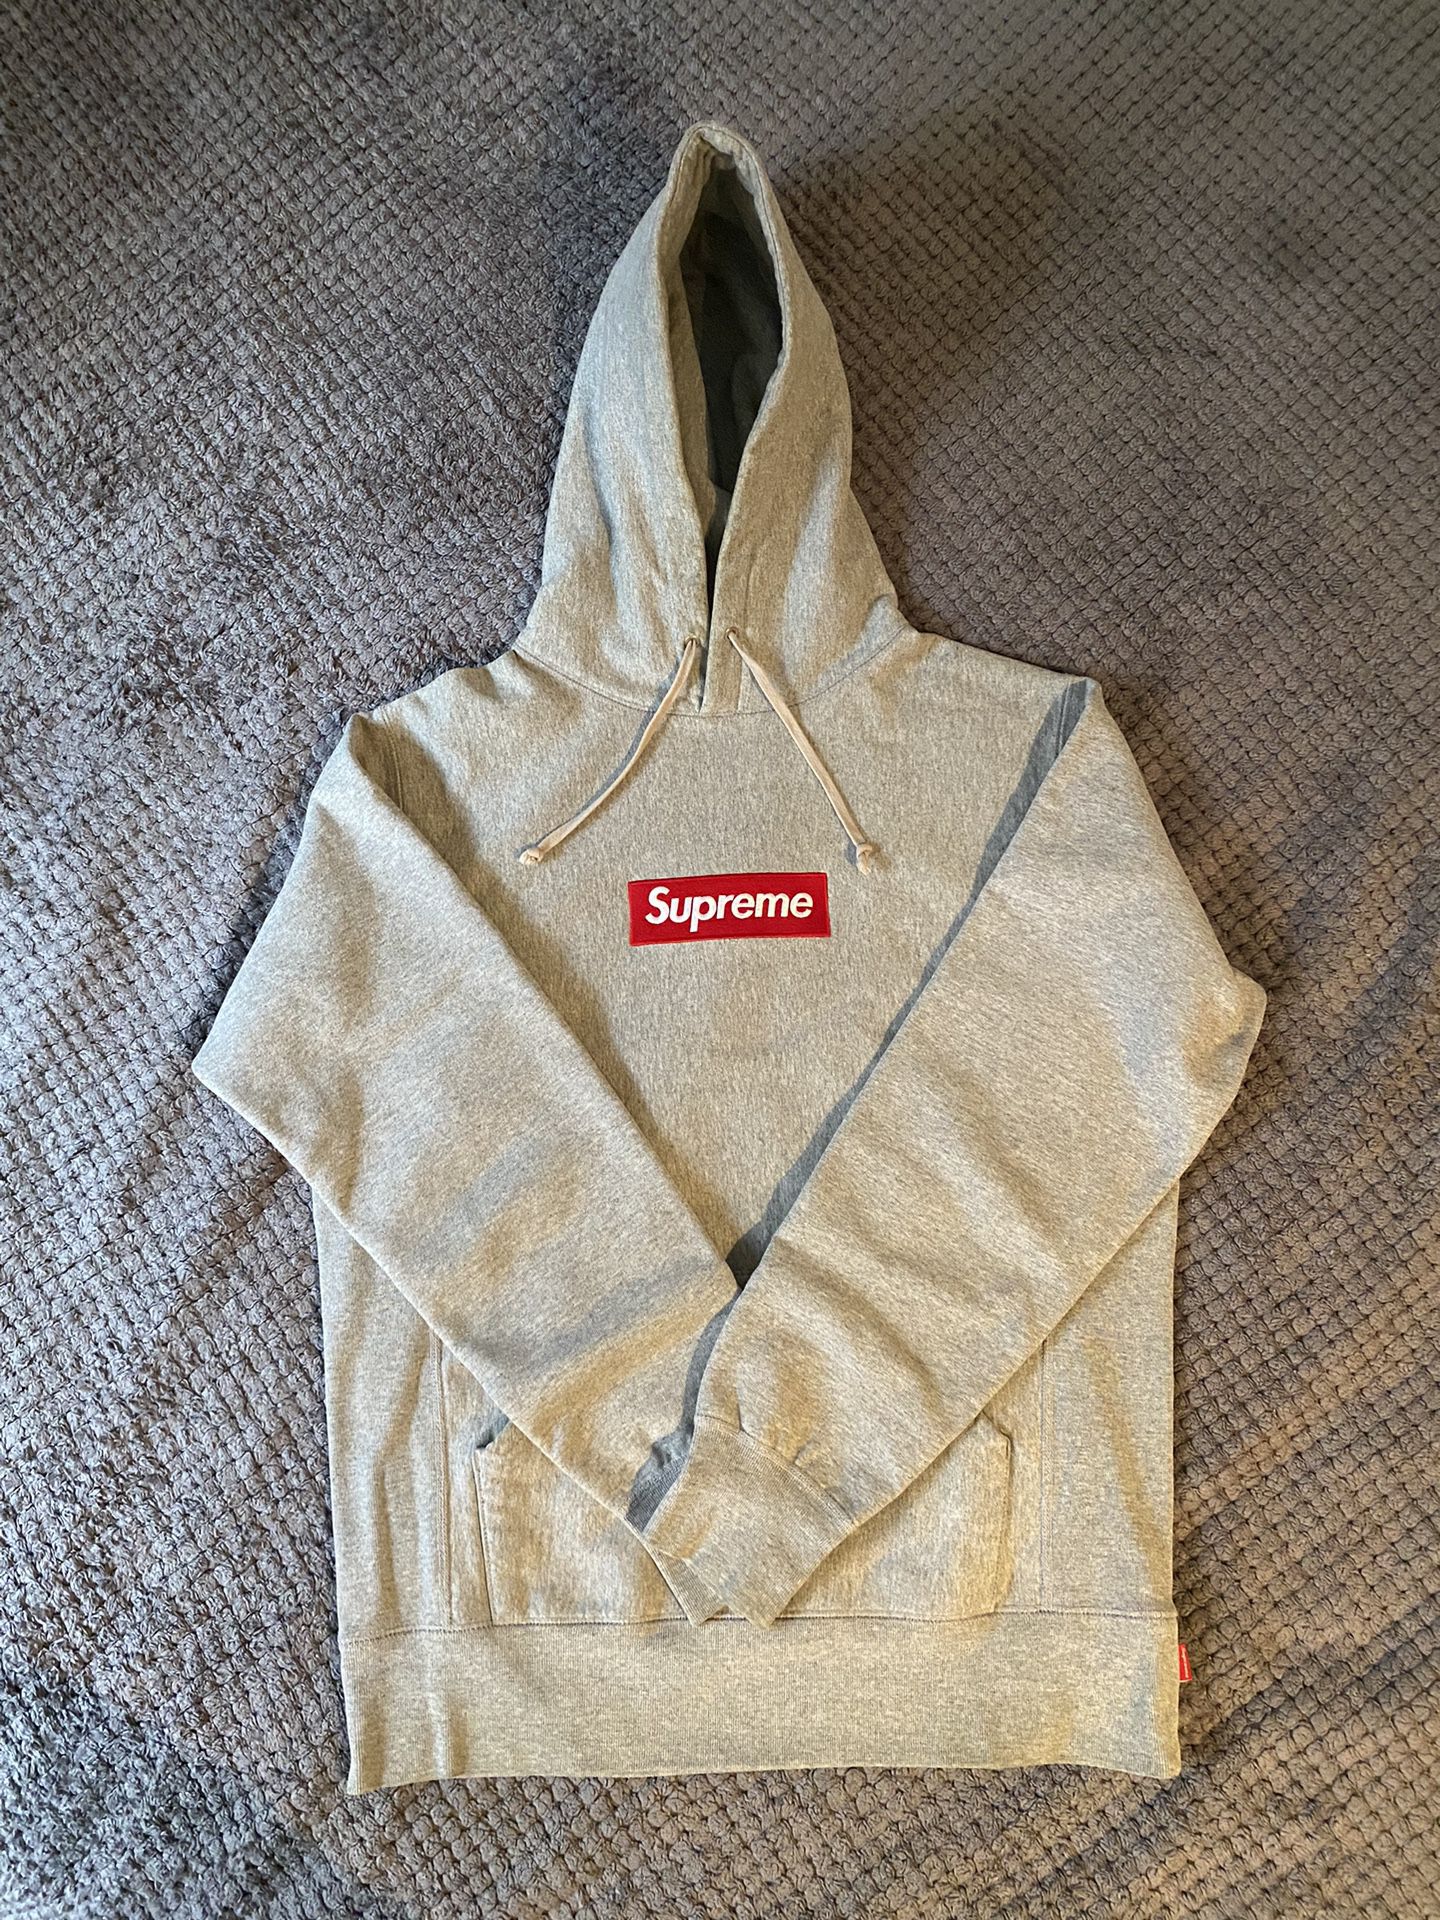 supreme hoodie size medium price negotiable for Sale in Queens, NY - OfferUp